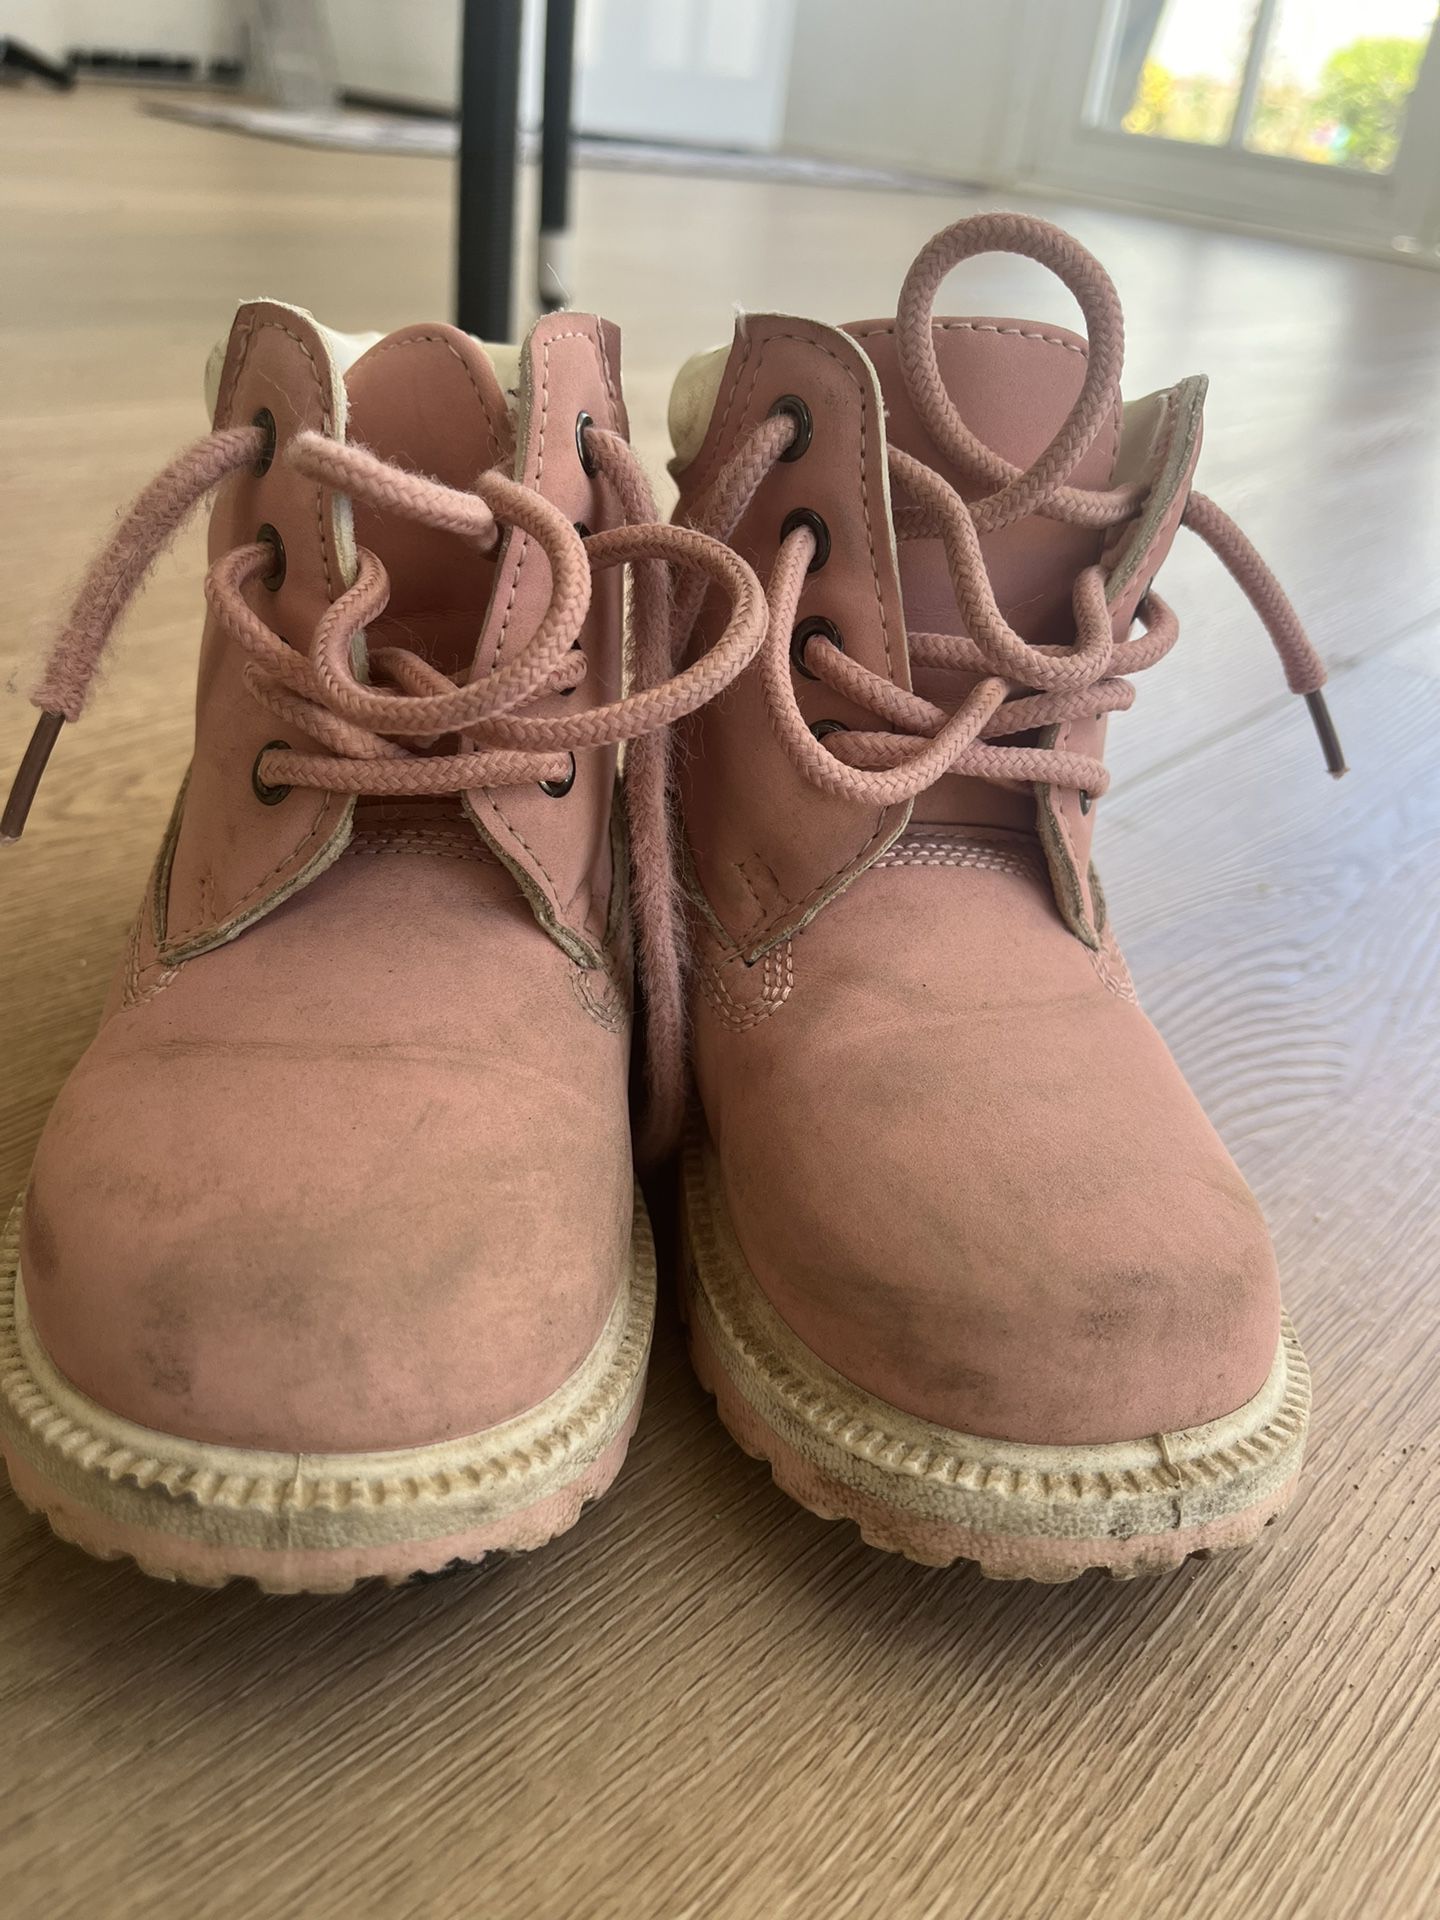 Toddler Girl Shoes Size 9